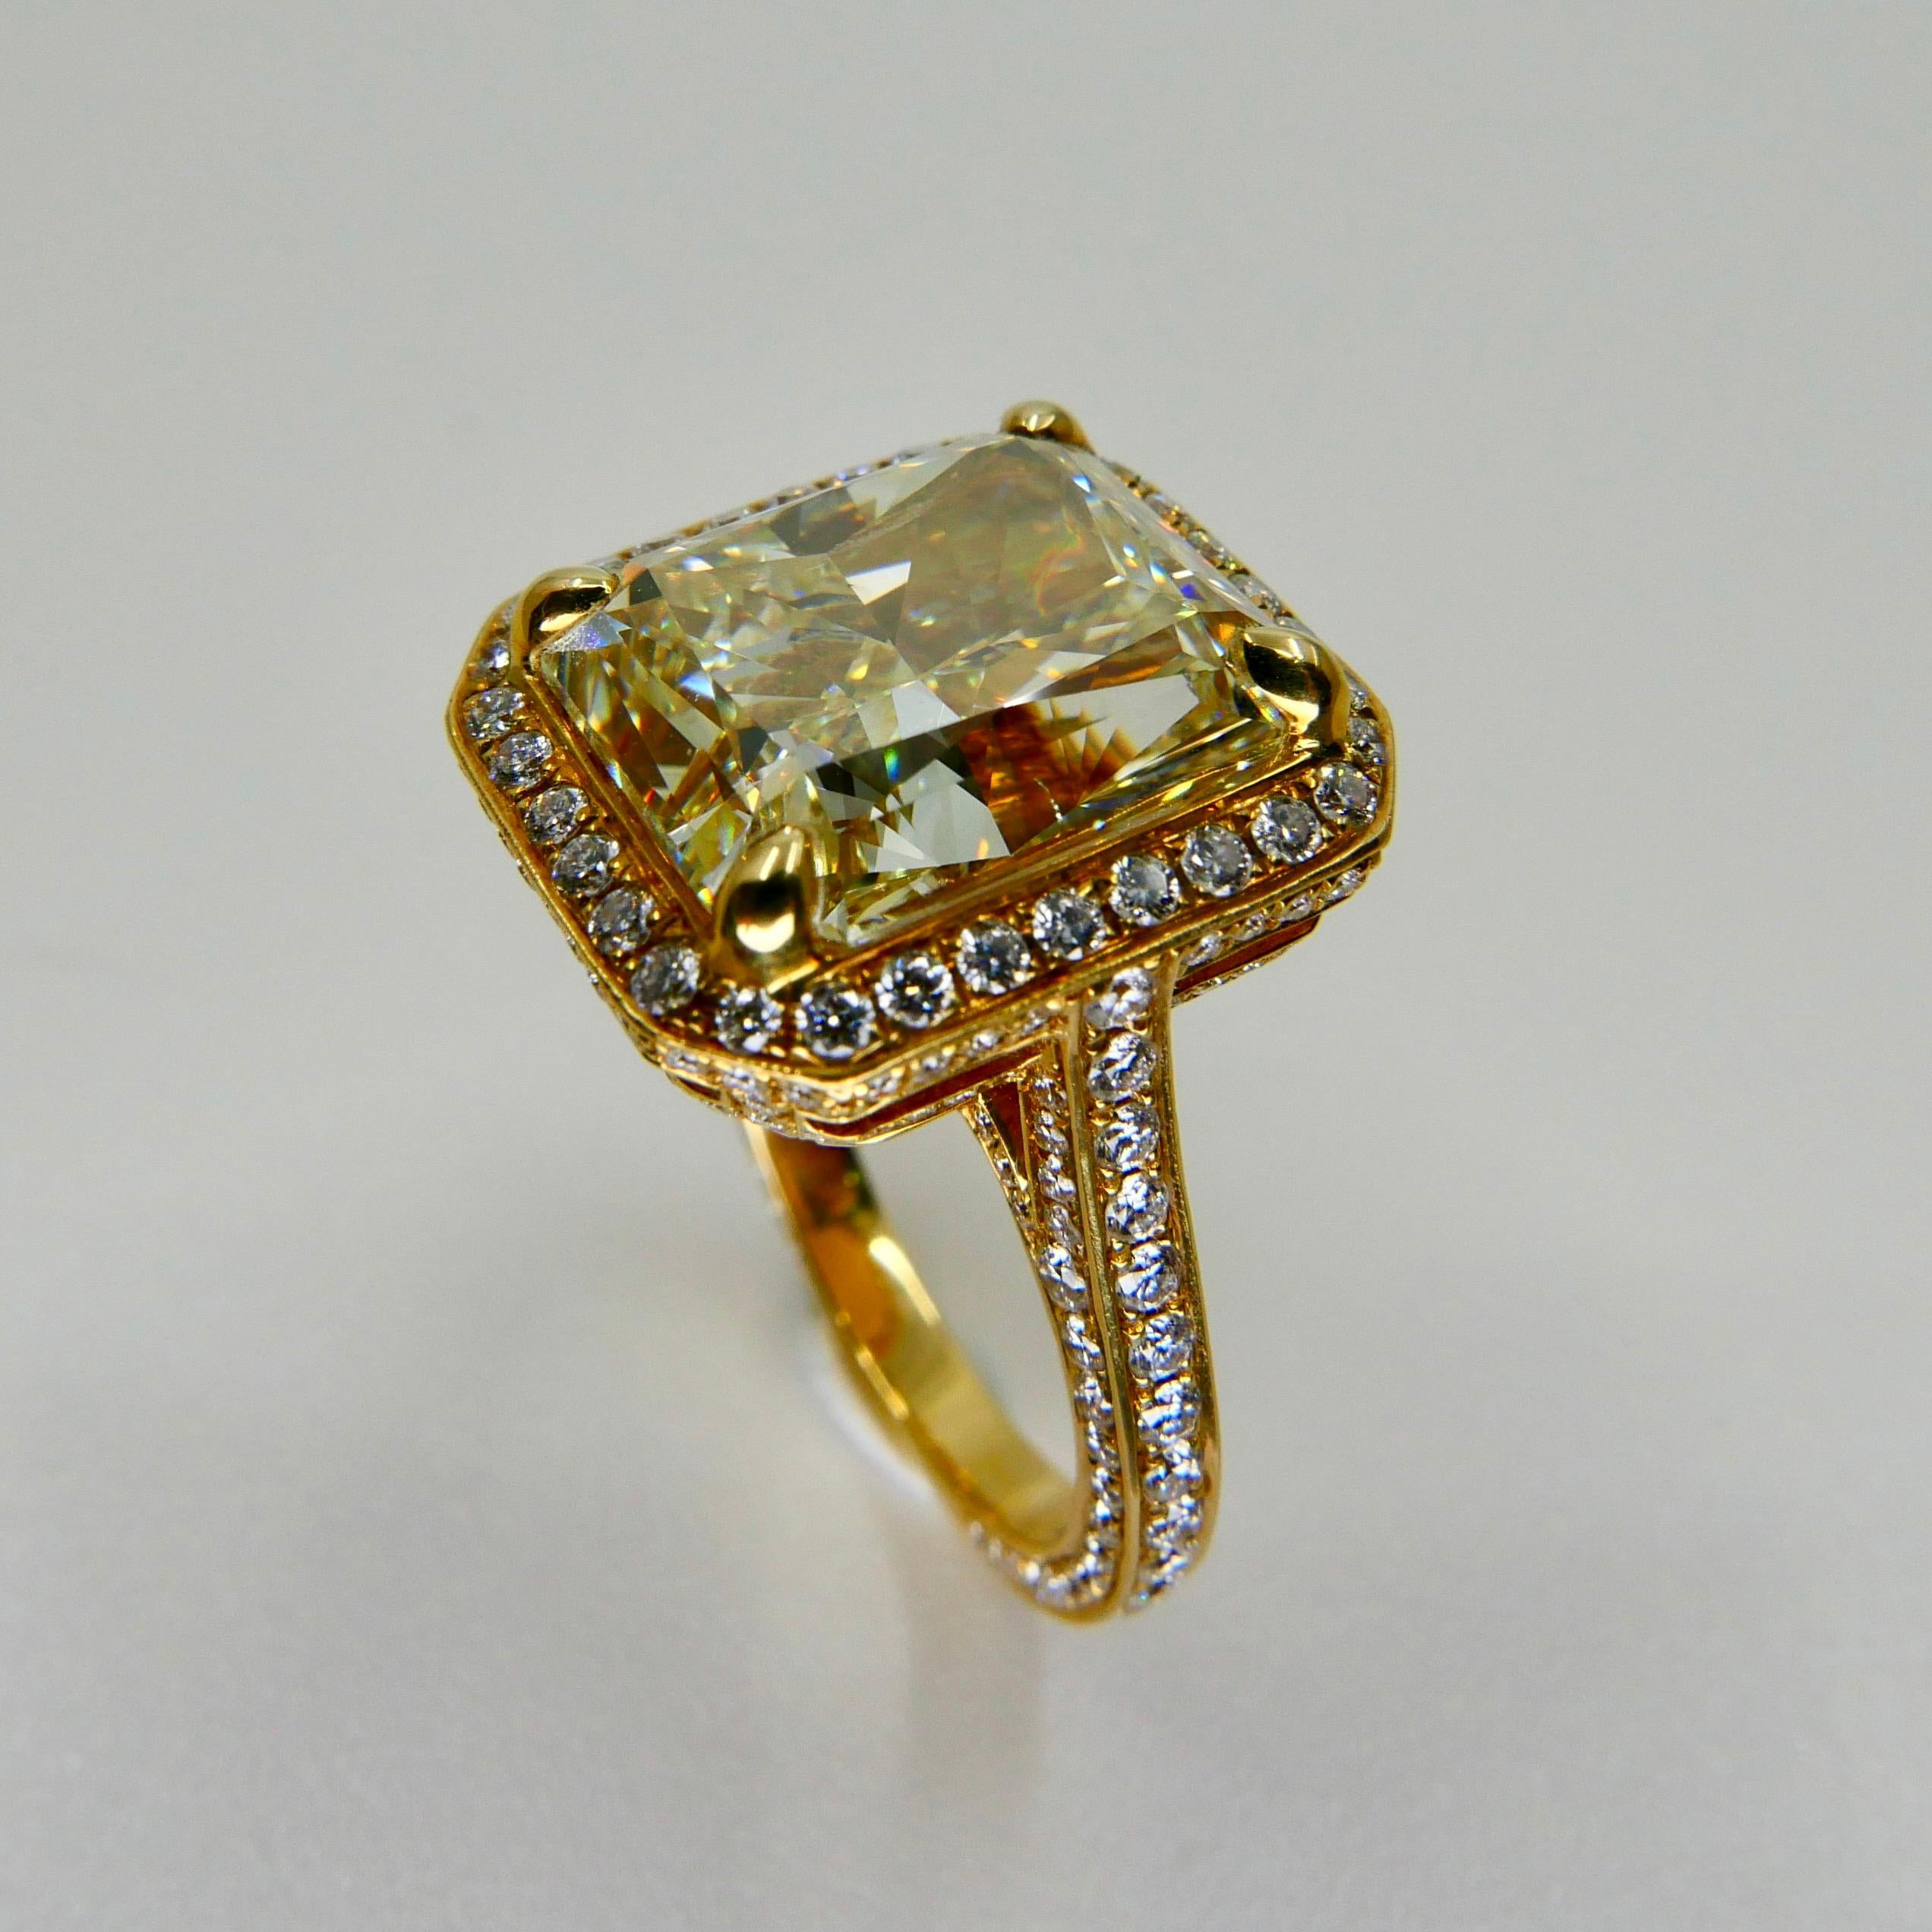 Contemporary GIA Certified 9 Carat Yellow Diamond Engagement Ring, Oversized & Eye Clean